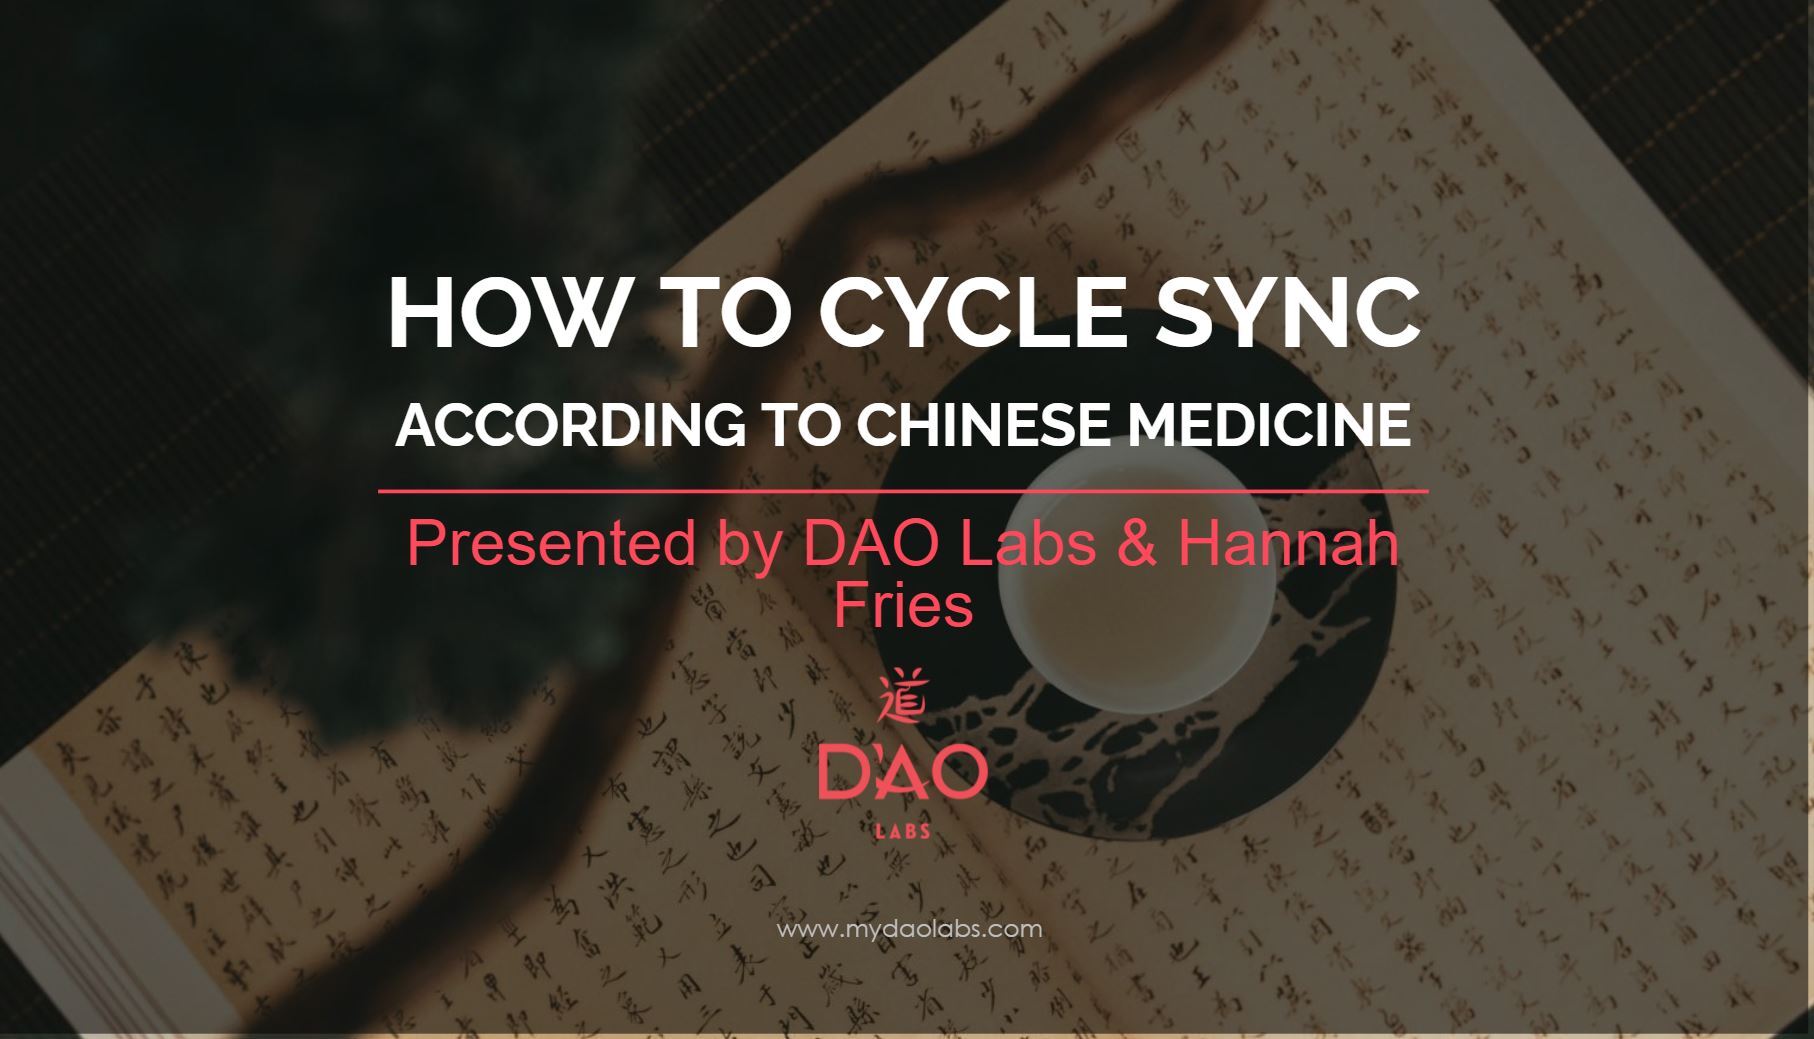 How to Cycle Sync with Chinese Medicine